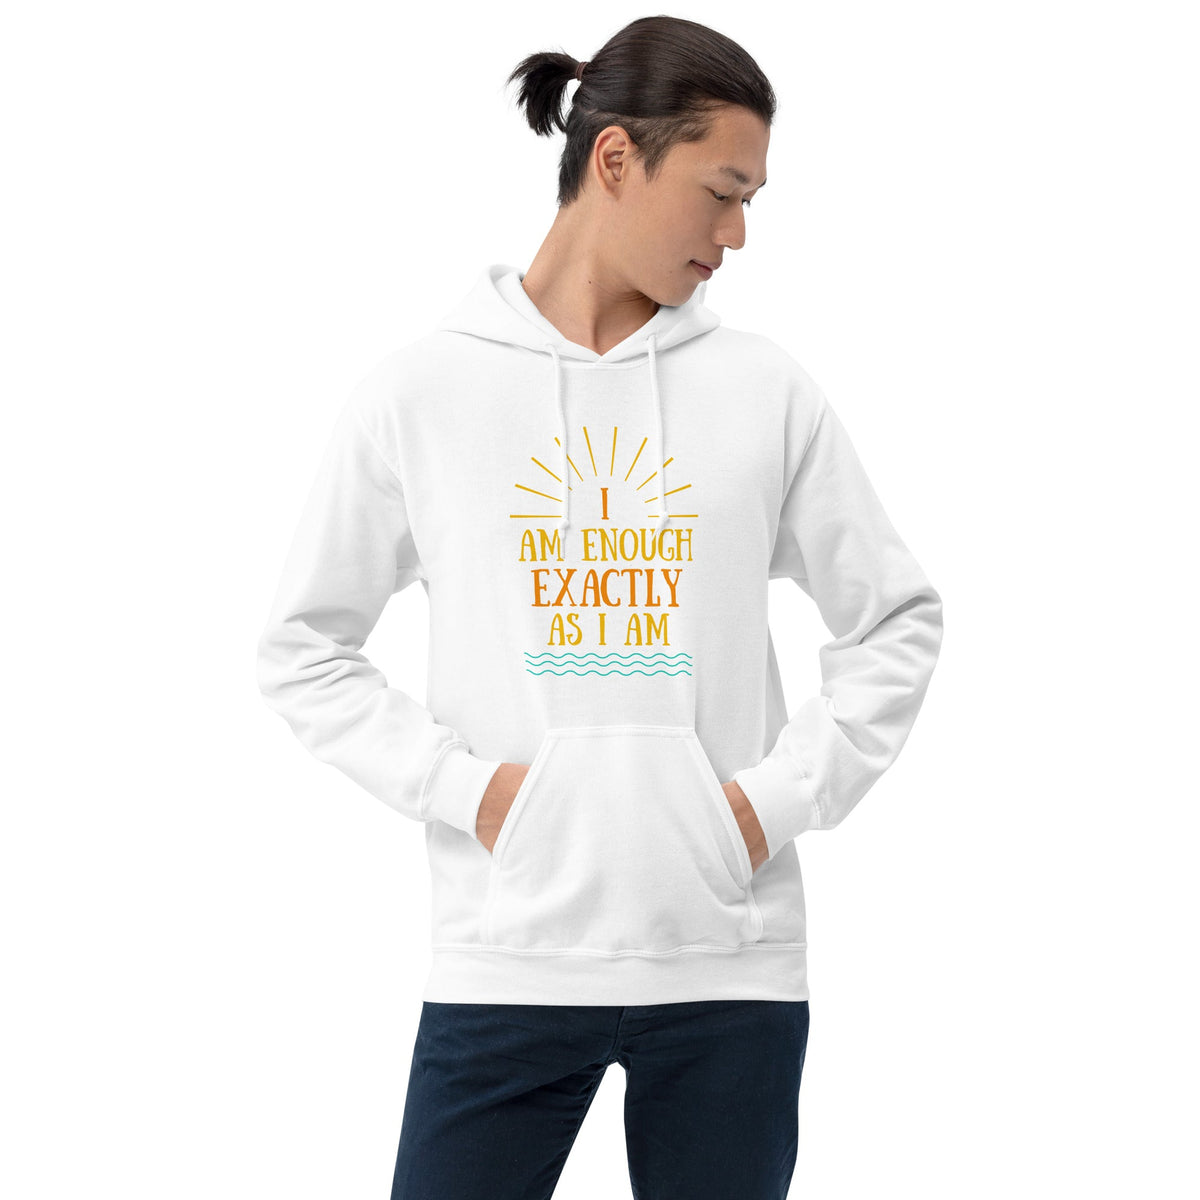 I AM ENOUGH EXACTLY AS I AM - Vintage Hoodie for Men | I Am Enough Collection